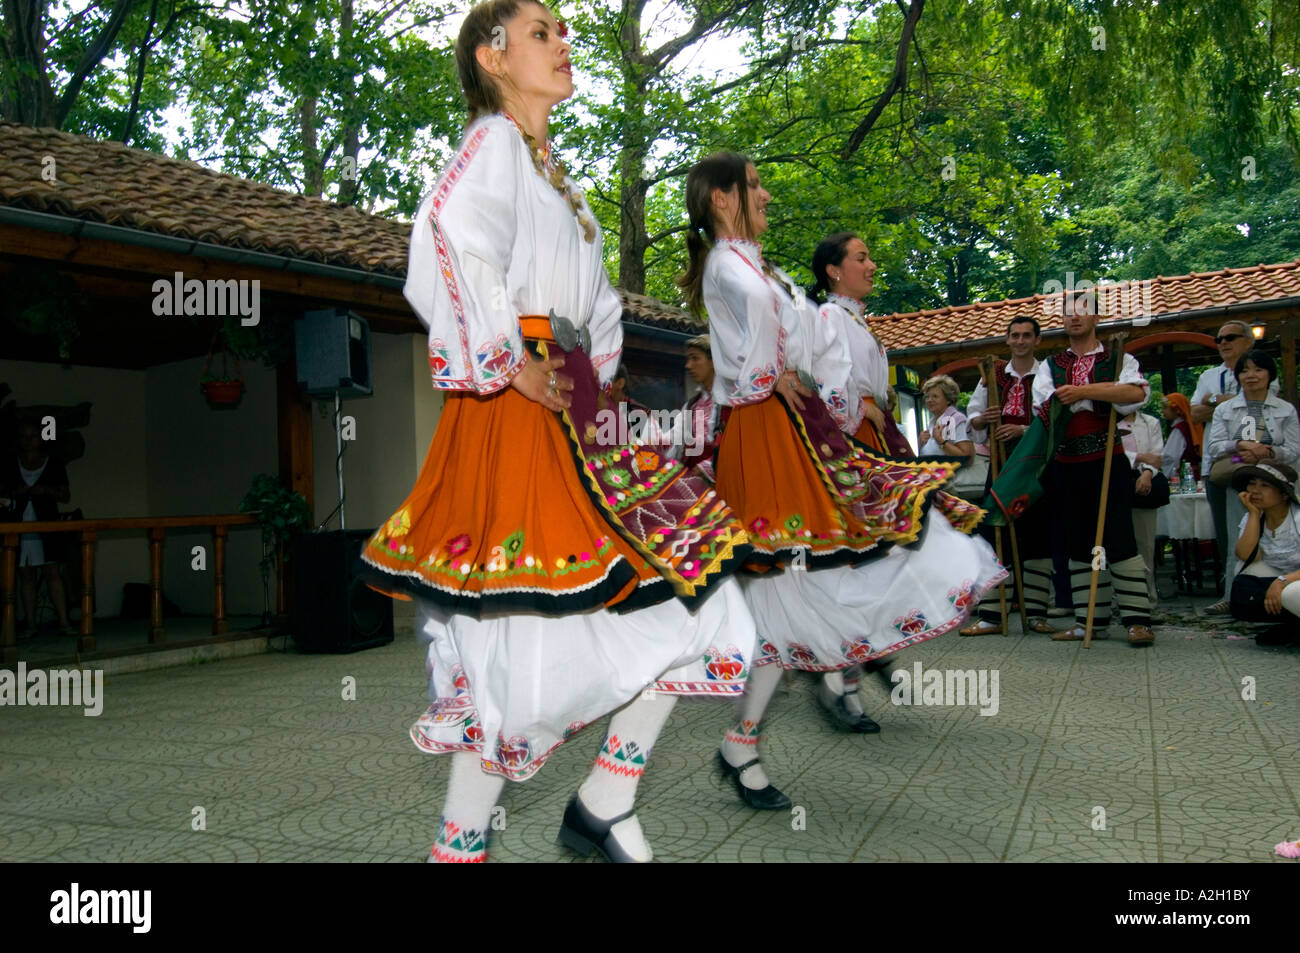 Folklore traditional dance for tourists, Europe Bulgaria Valley Of The Roses Kazanluk Festival Of the Roses Stock Photo